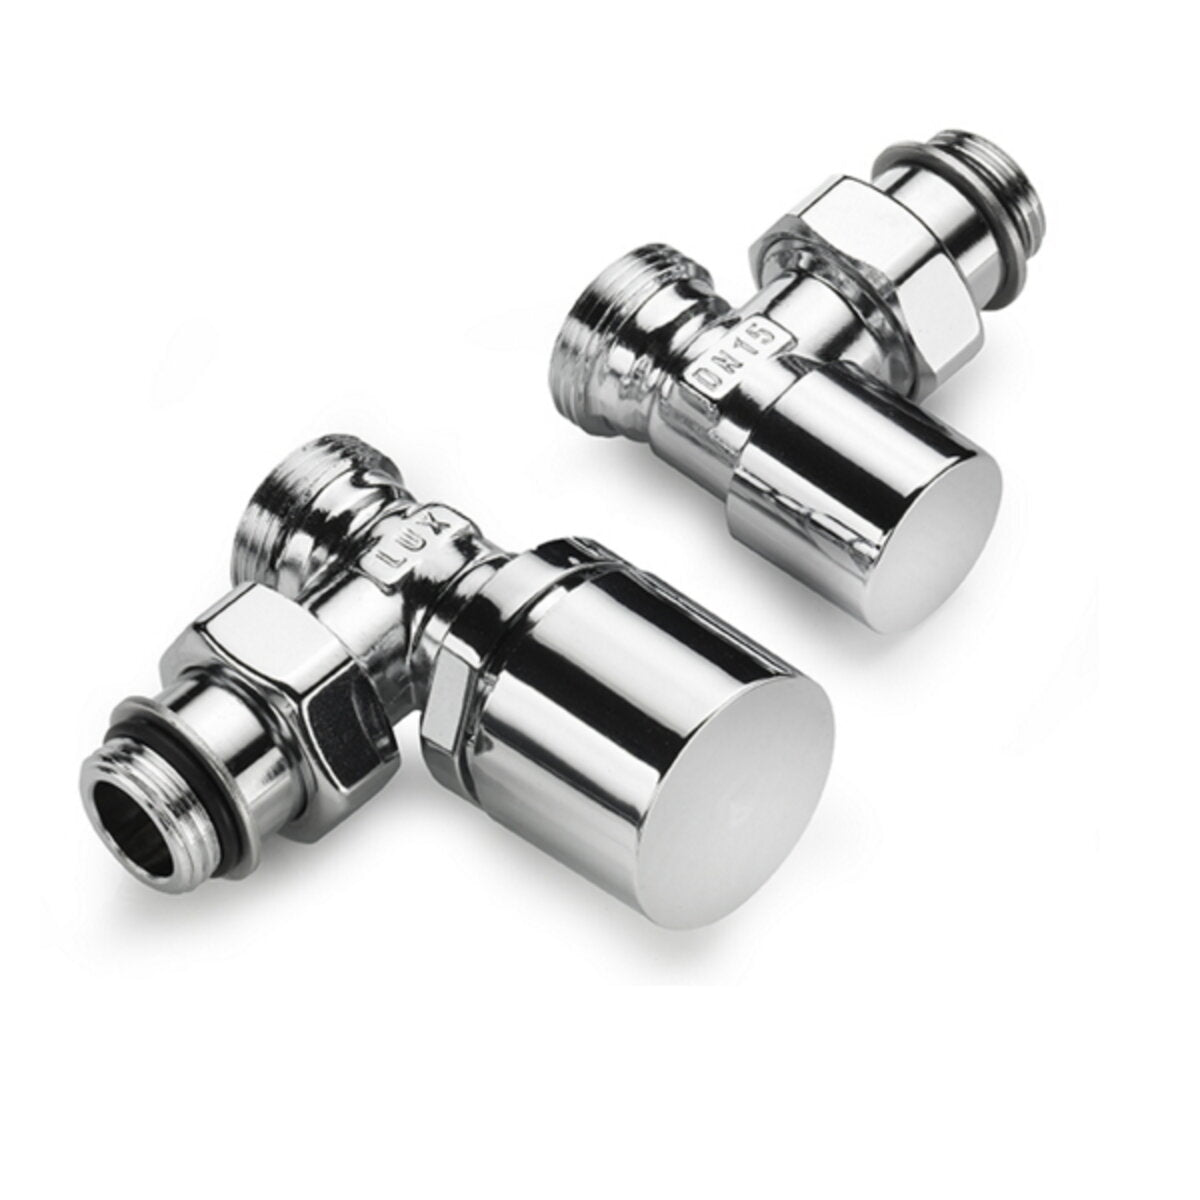 Chromed Ercos kit with thermostatic option with angle valve and lockshield connections 1/2" for radiators